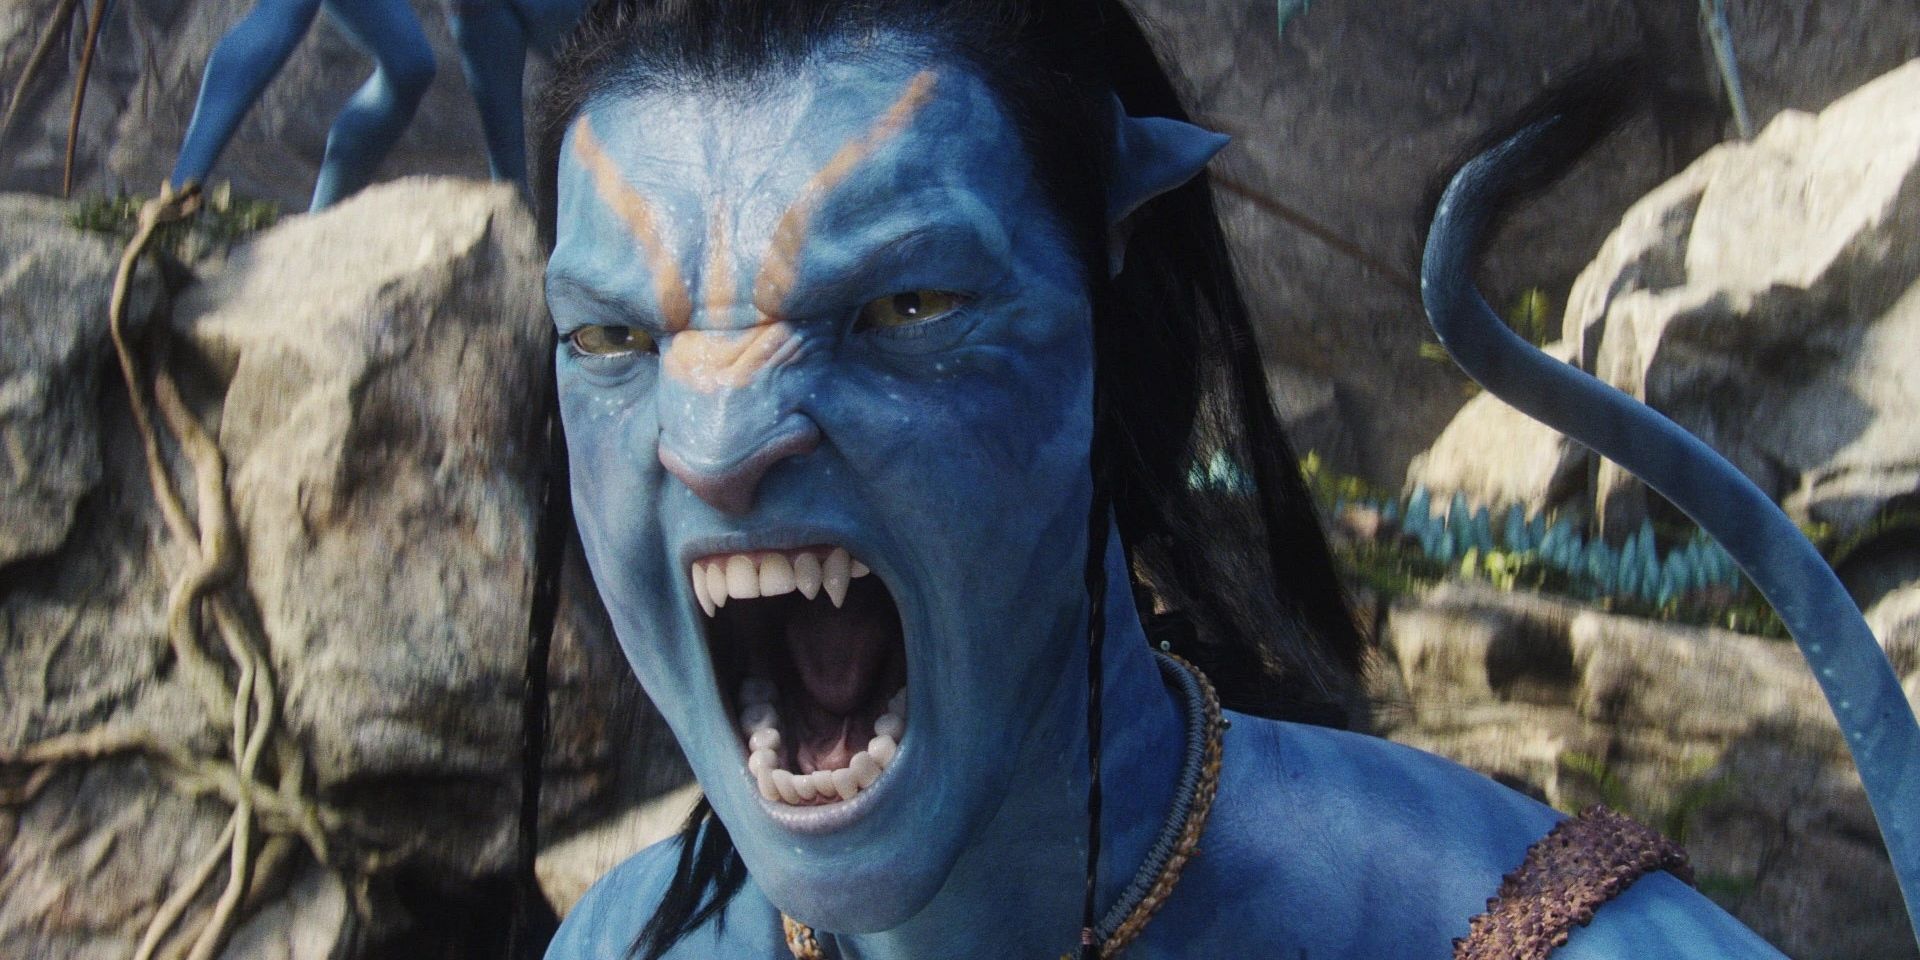 Jake Sully roars during a scene in Avatar